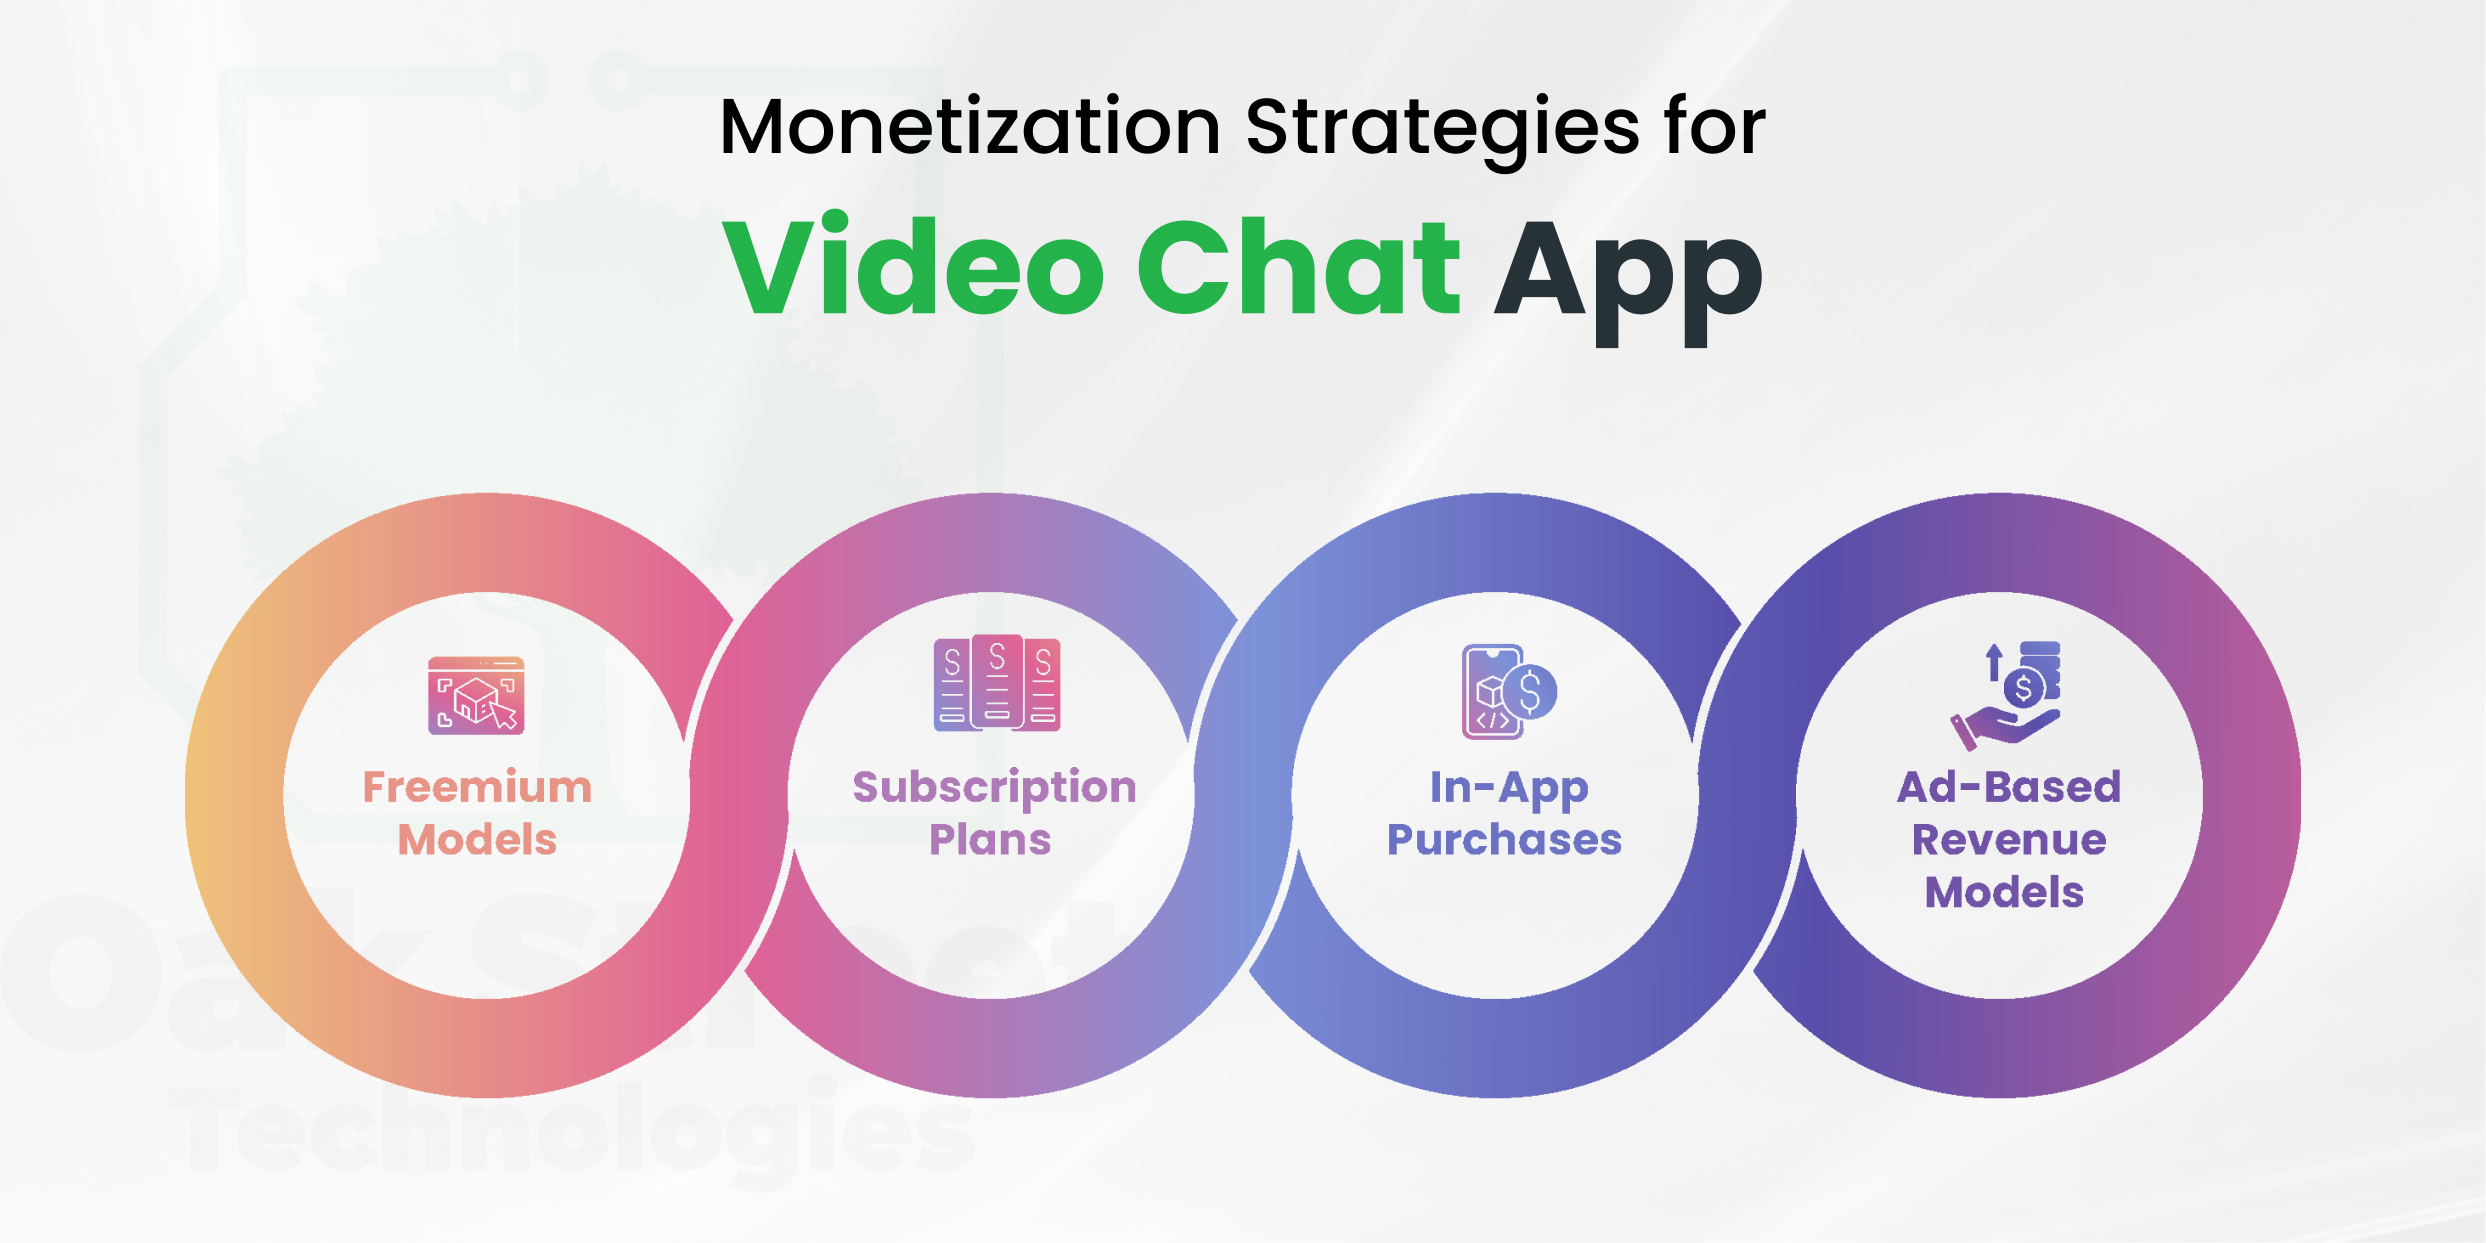 Monetization Strategies for Video Chat Apps